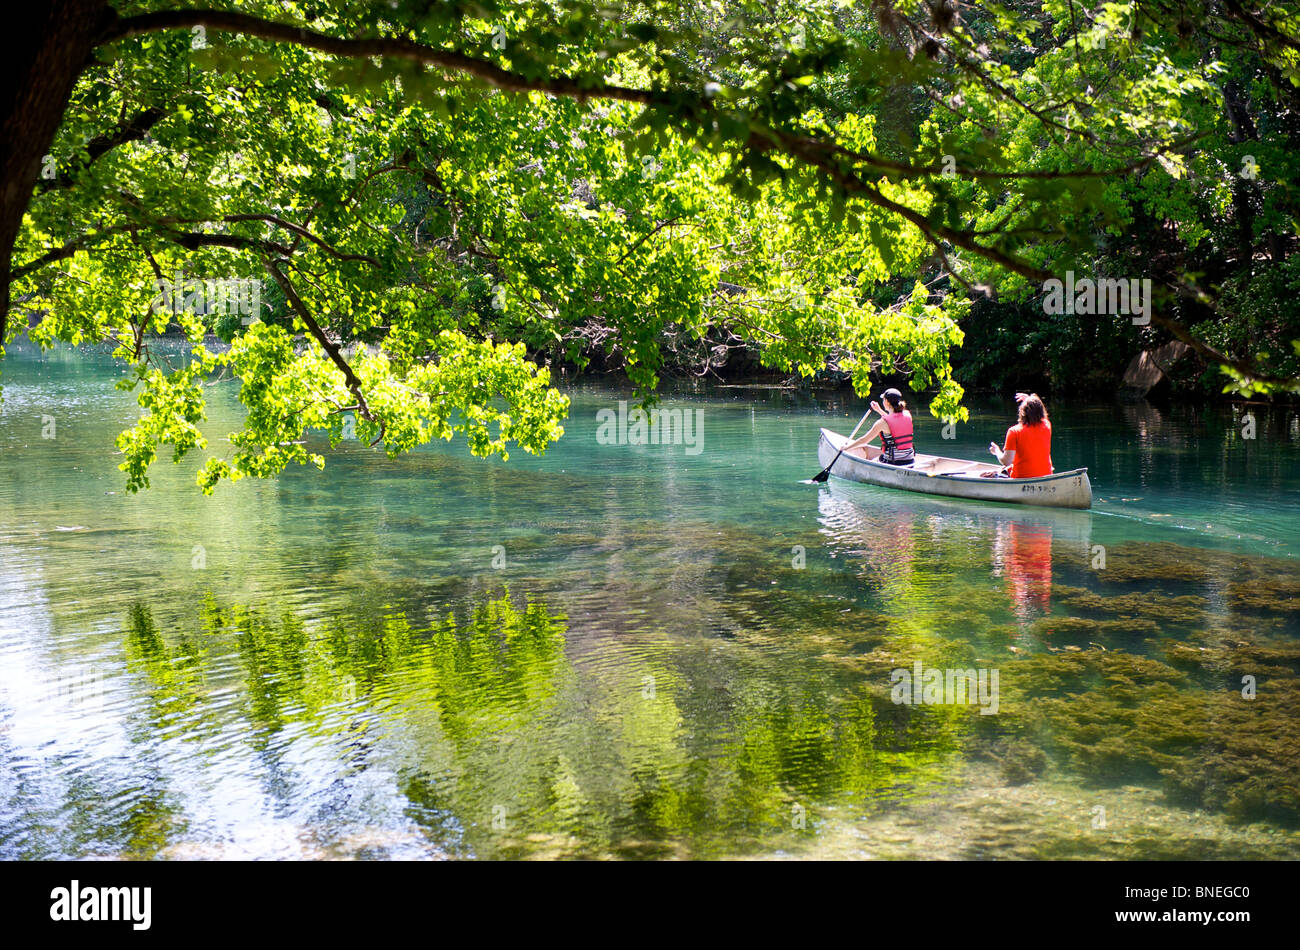 Canoe has been rent for boating on Colorado River in, Zilkar Park Austin Texas, USA Stock Photo